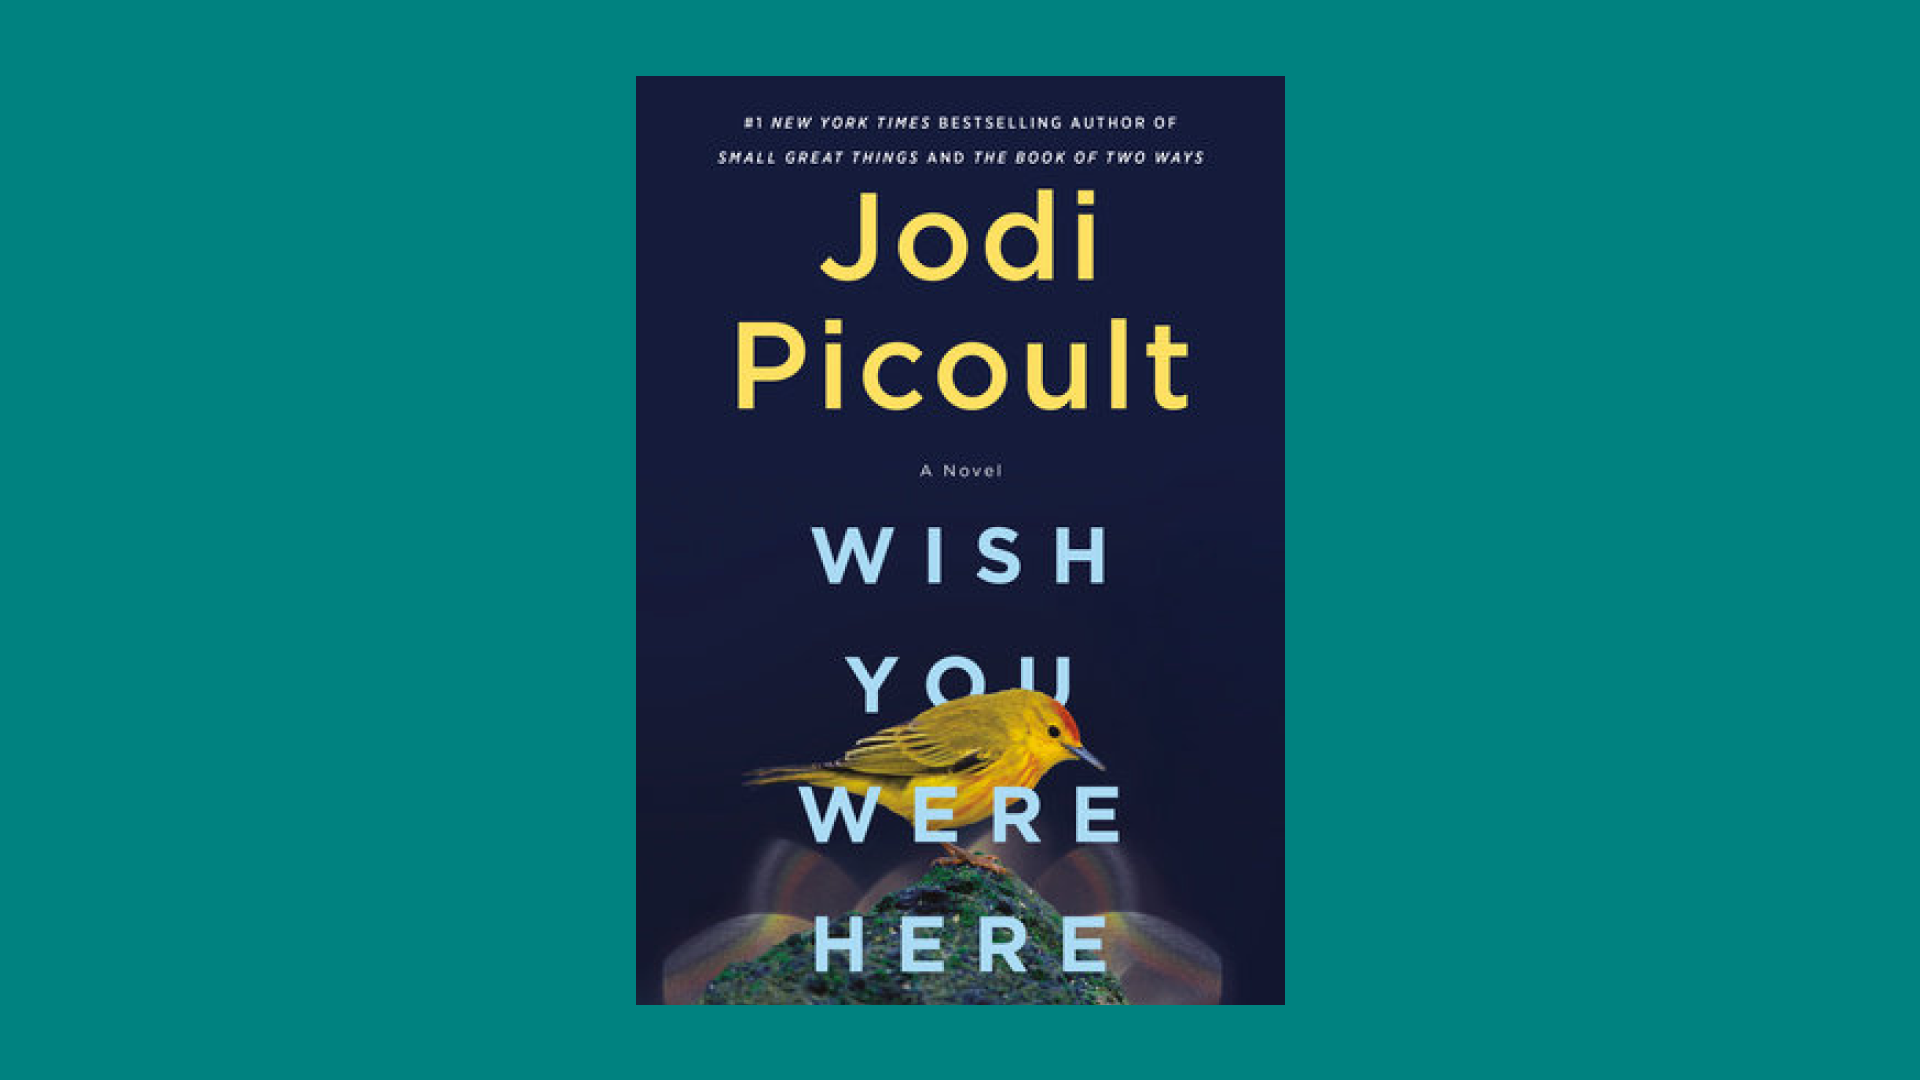 “Wish You Were Here” by Jodi Picoult